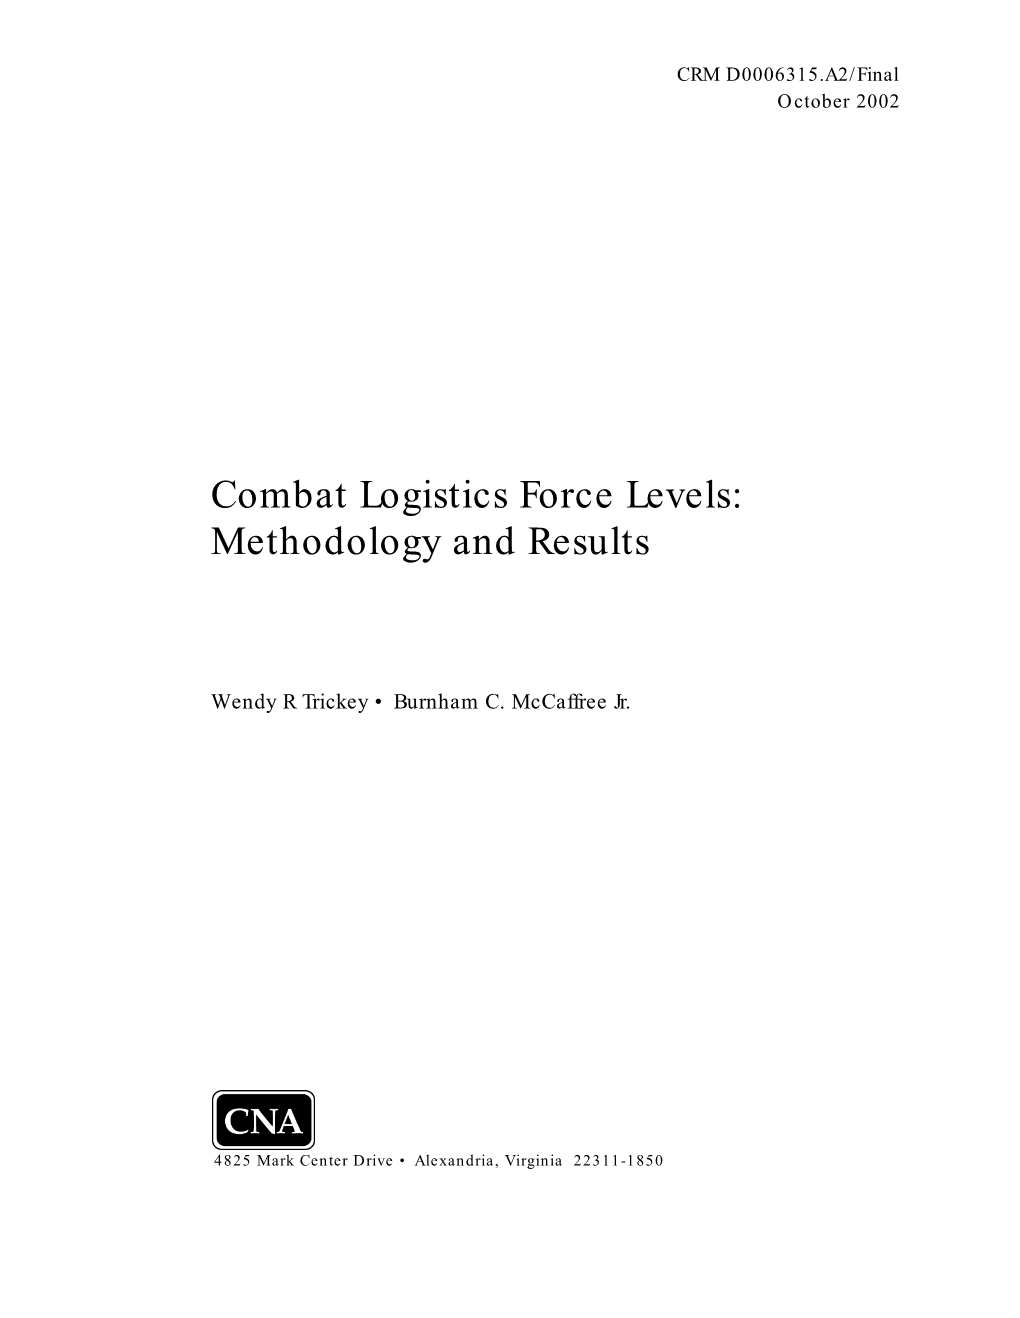 Combat Logistics Force Levels: Methodology and Results